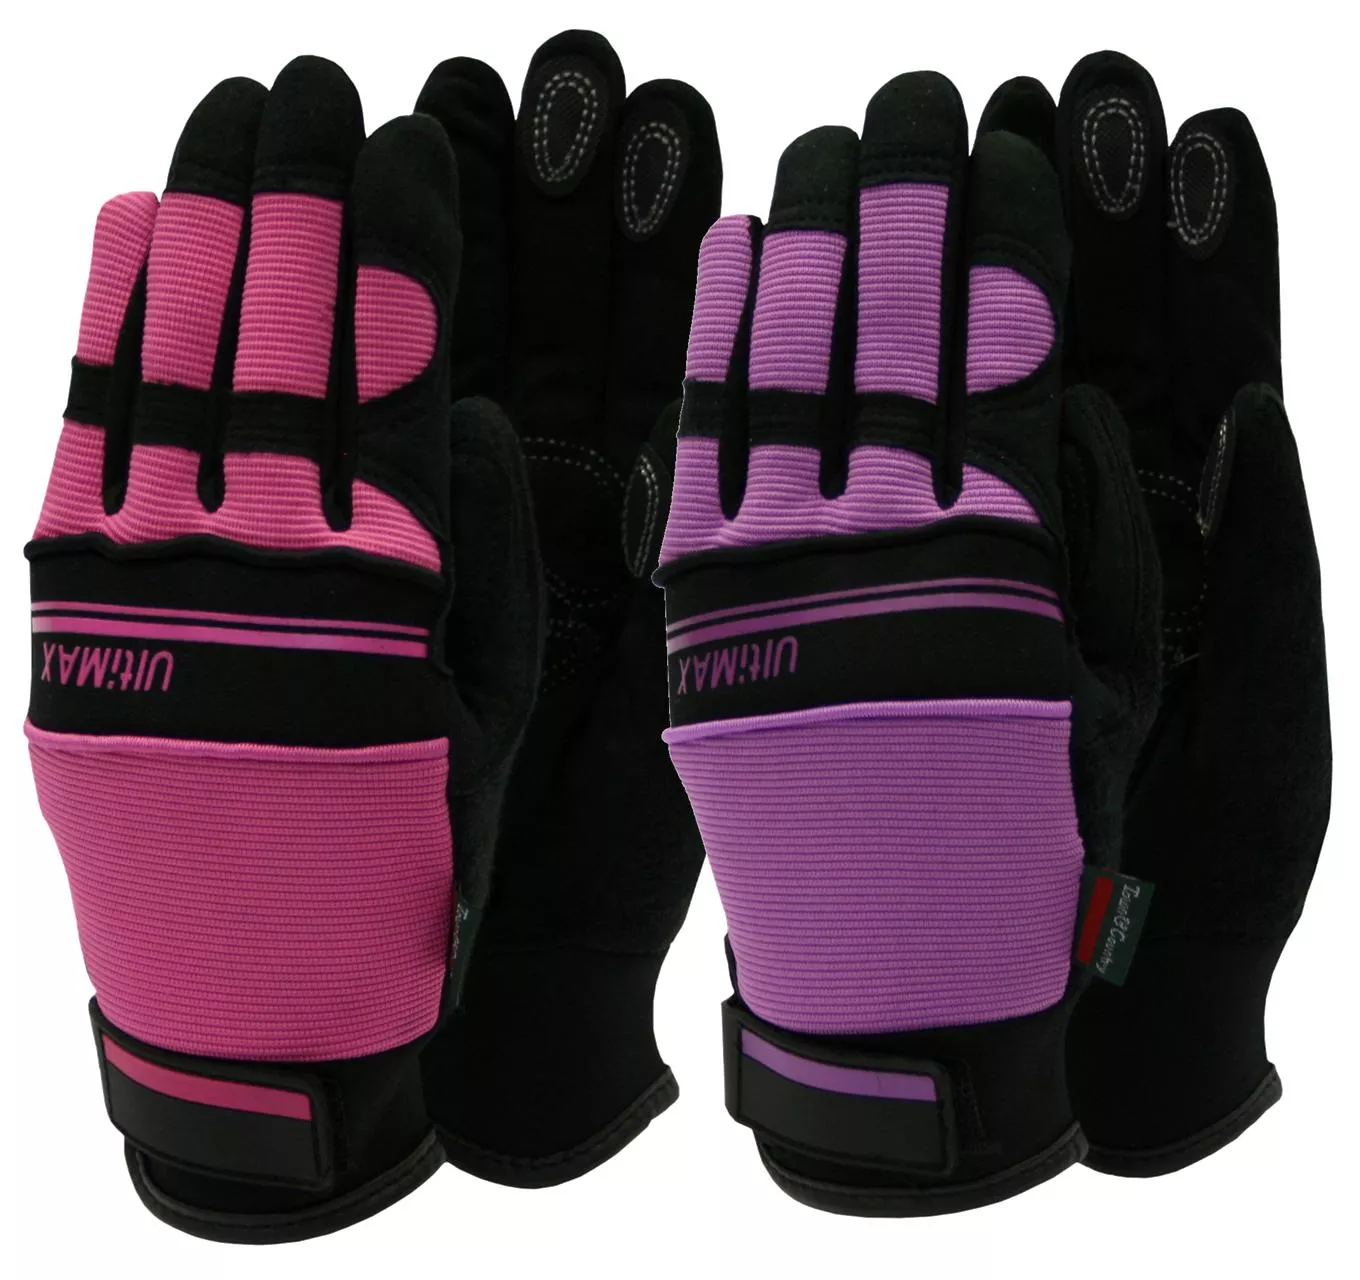 Deluxe Ultimax Gloves S